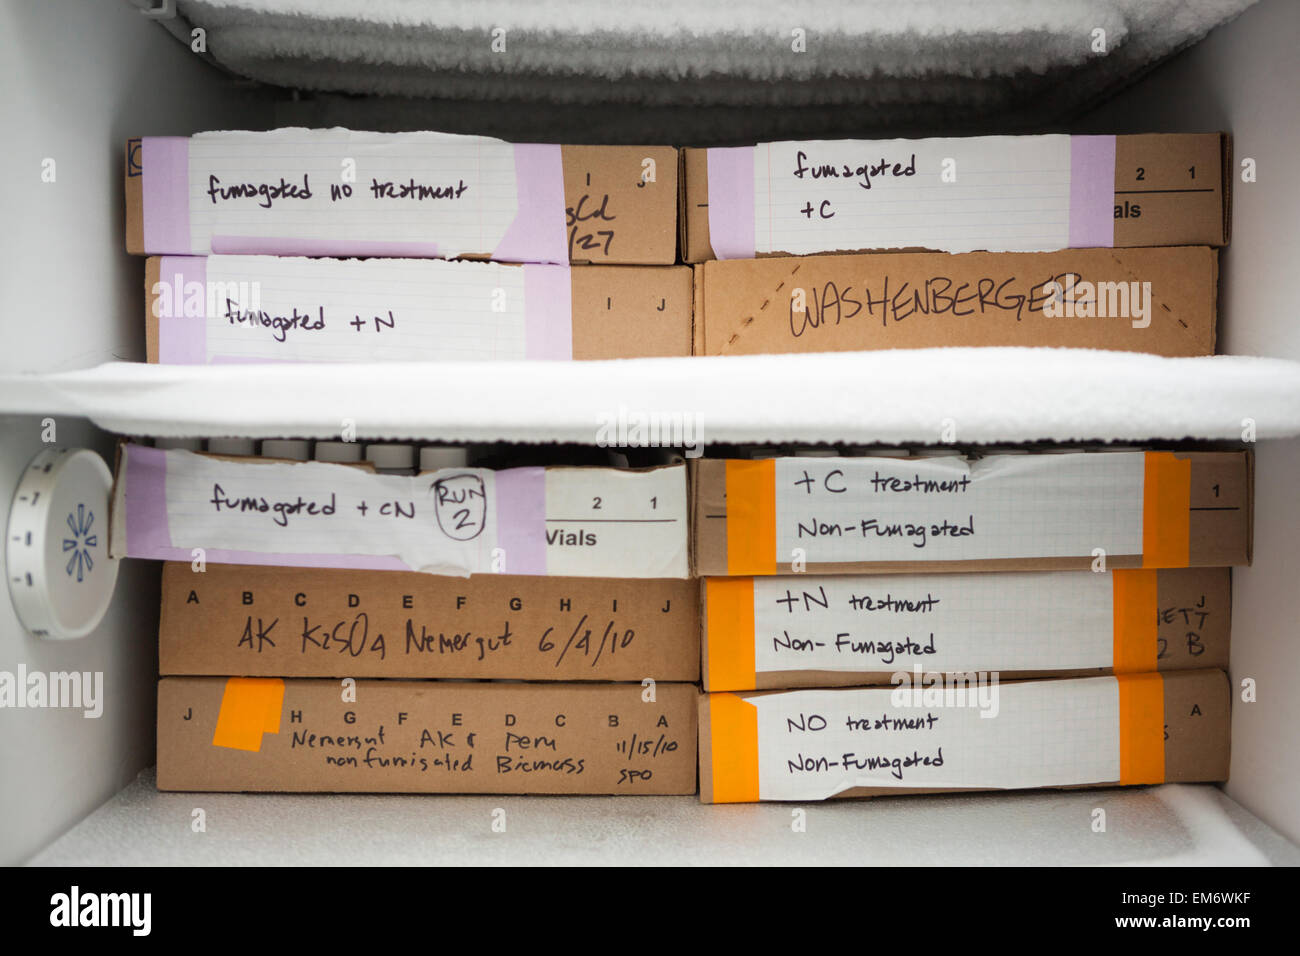 Sediment samples from Alaska and Peru in a freezer at a sedimentology laboratory in Boulder, Colorado. Stock Photo